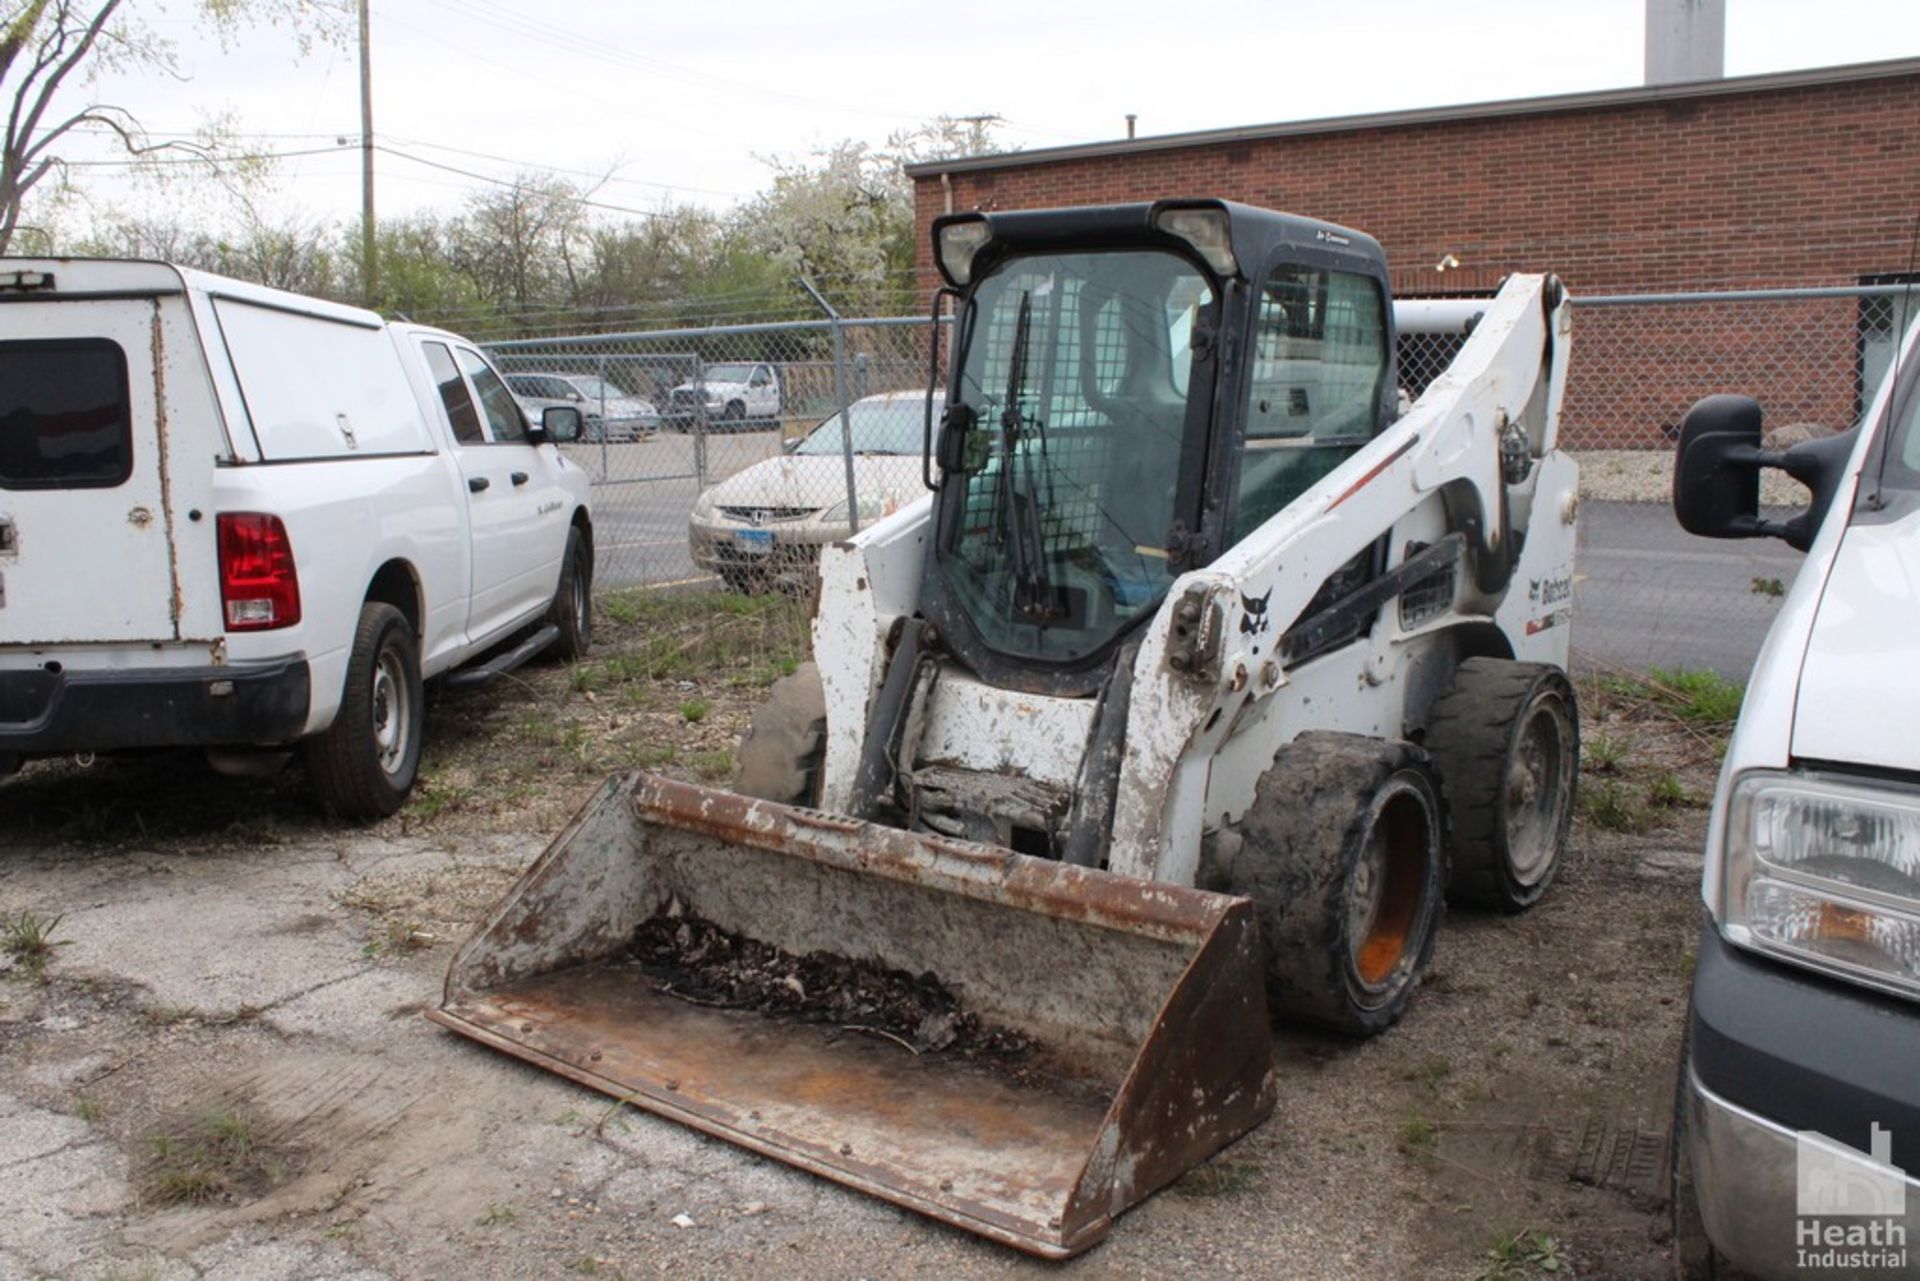 BOBCAT S750 SKID LOADER, 5,371 HOURS ON METER, SOLID TIRES, TRI-PIPE AUXILLARY HYDRAULICS, HYDRAULI